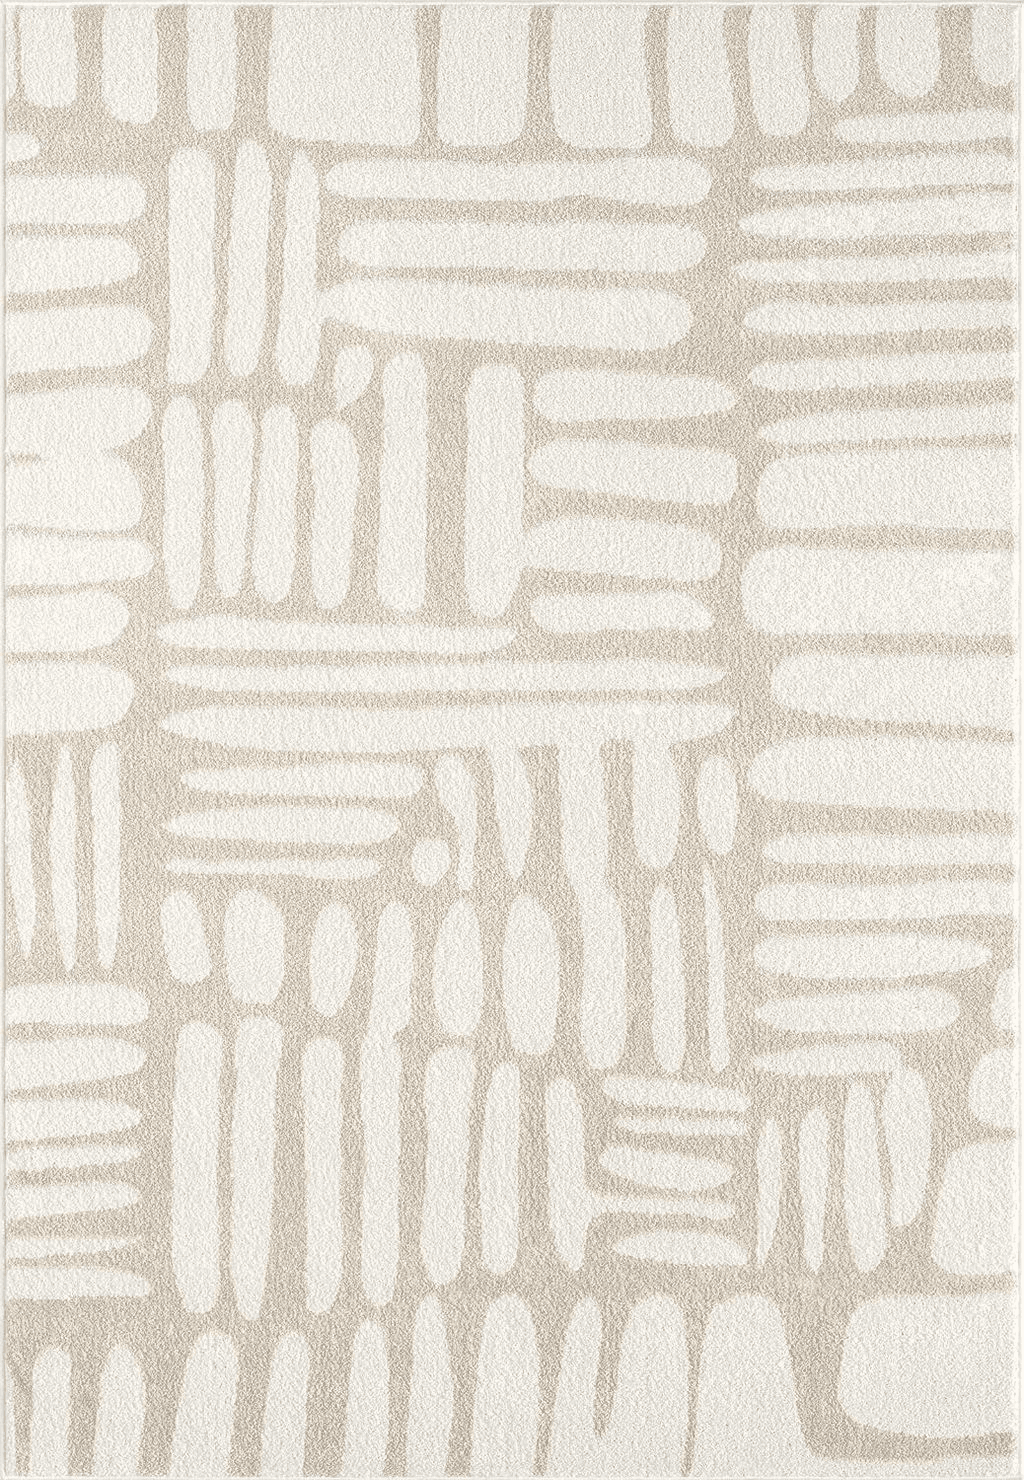 Abani Nuevo Collection Area Rug - Neutral Beige/Cream Abstract Design - 4'x6' - Easy to Clean - Durable for Kids & Pets - Non-Shedding - Medium Pile - Soft Feel - for Living Room, Bedroom & Office